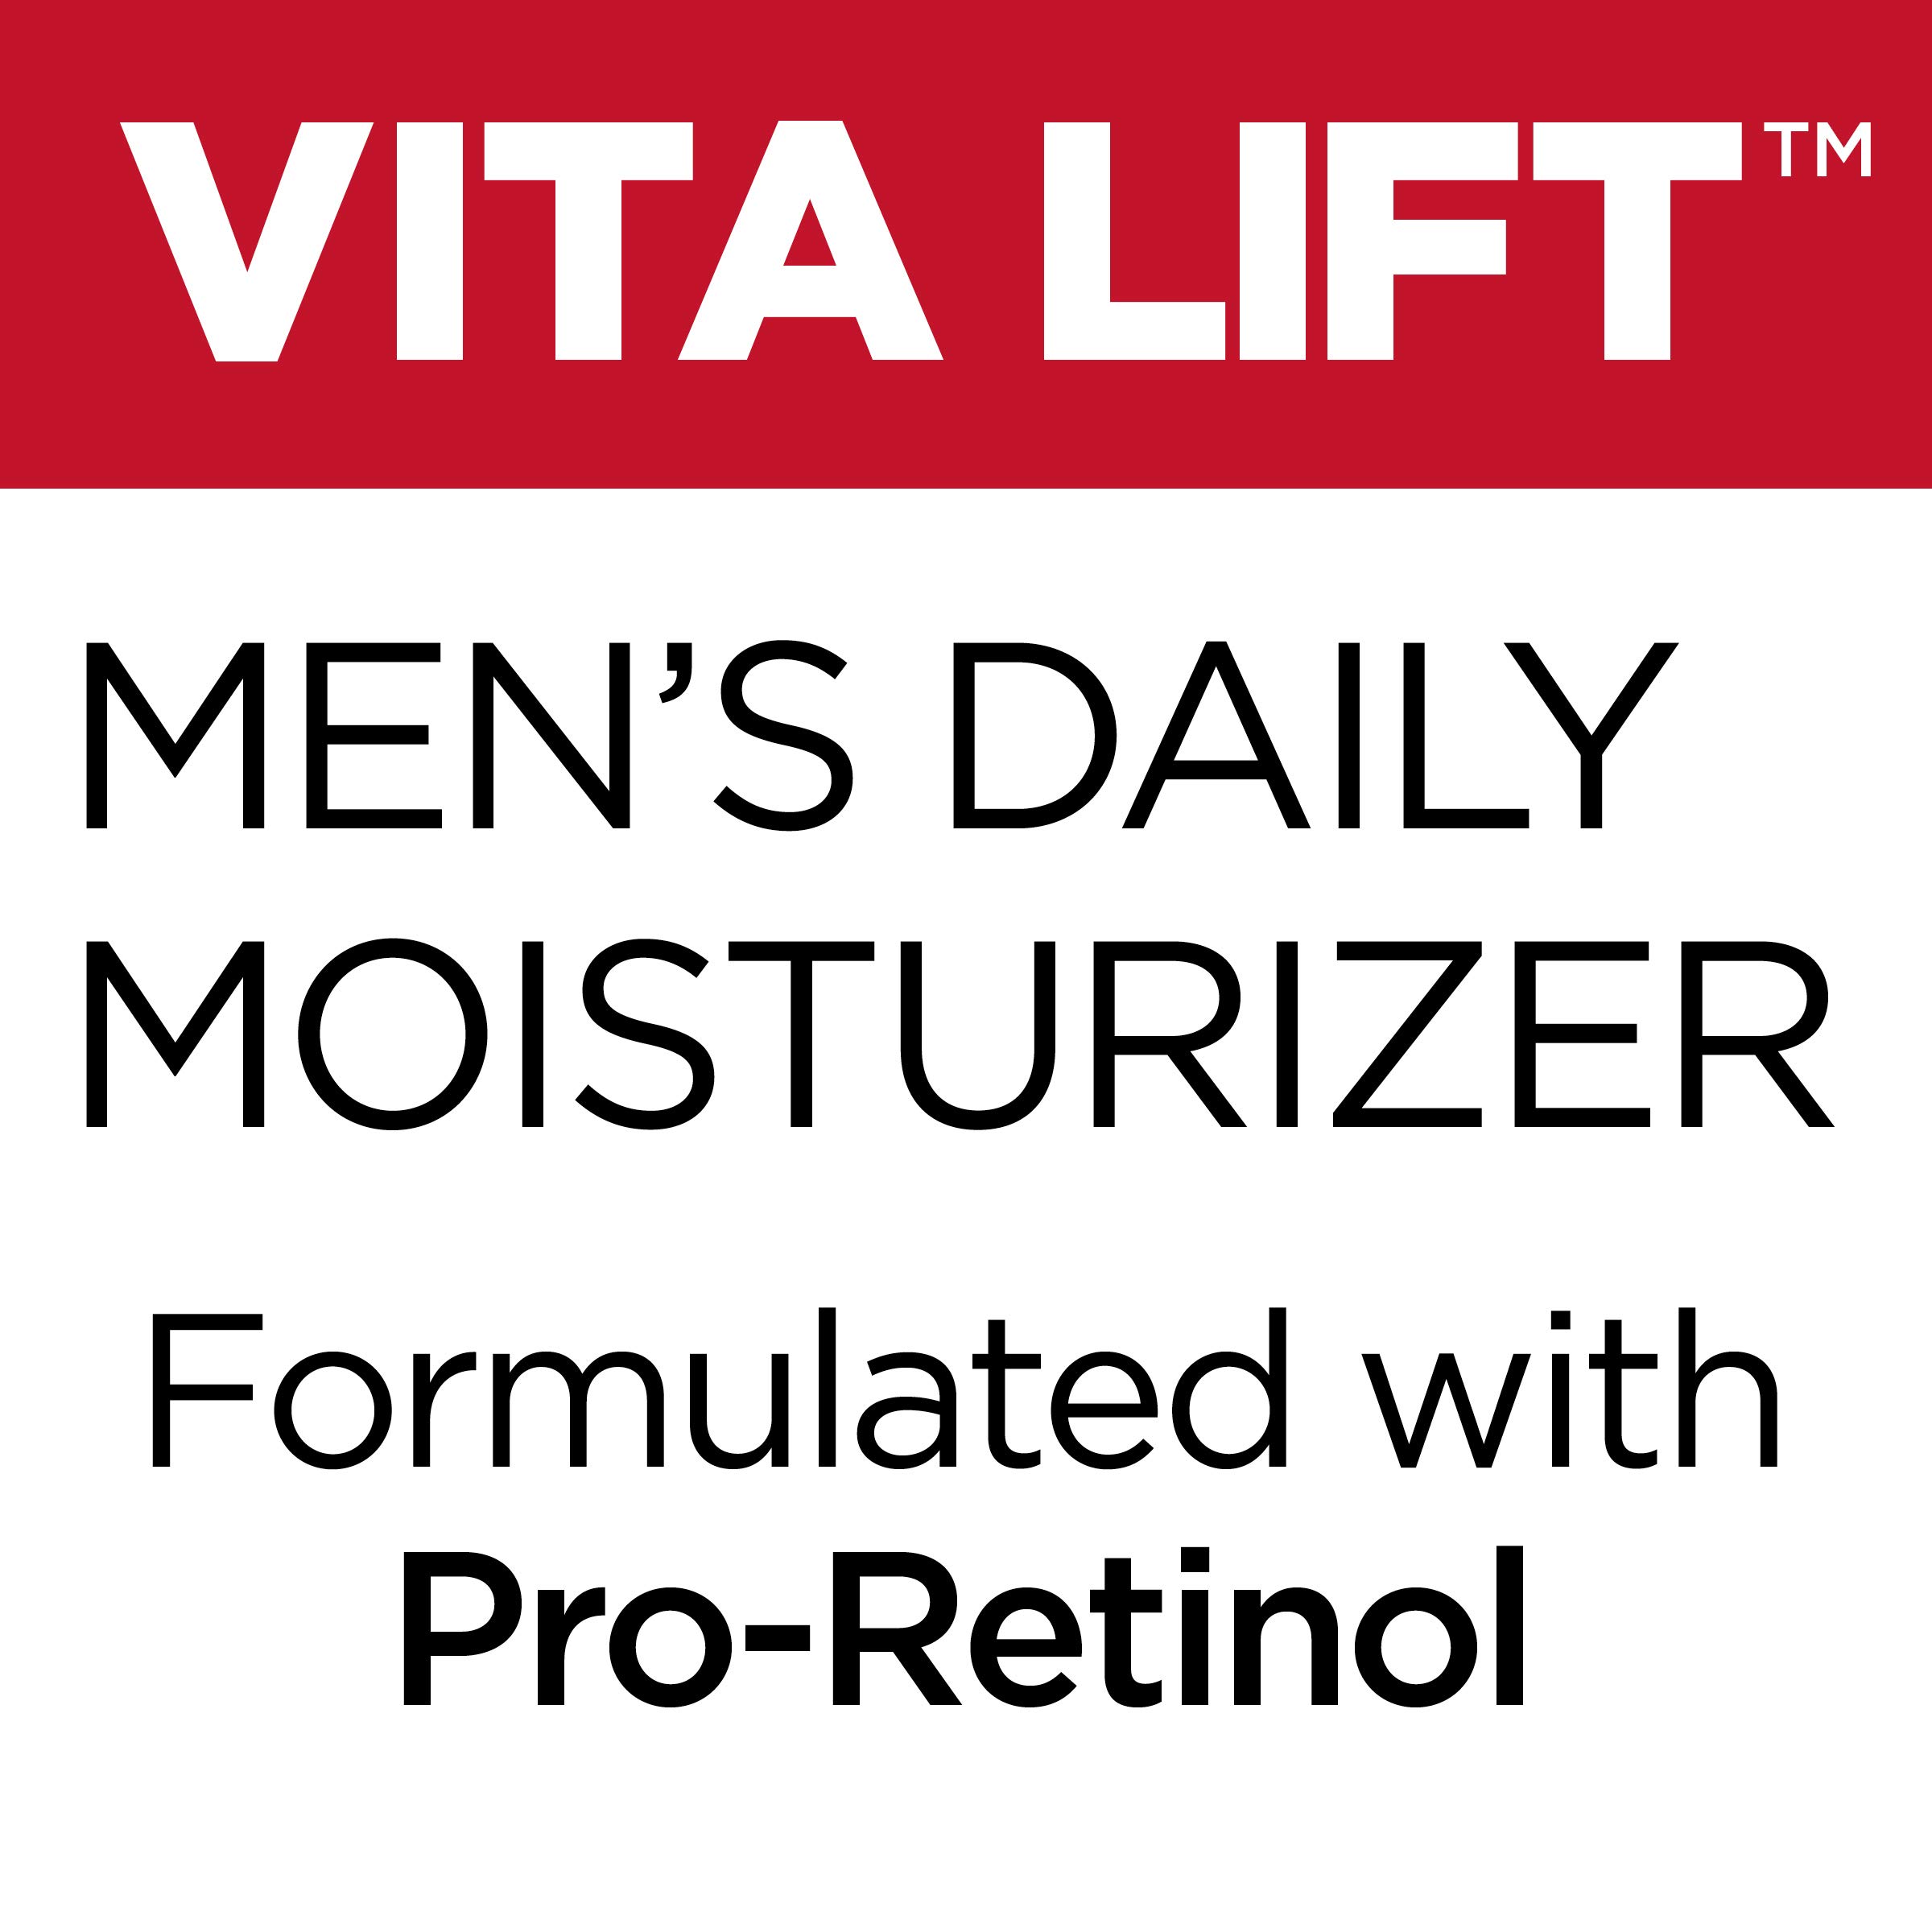 Loreal Mens Expert Vita Lift Anti-wrinkle and Firming Moisturizer - 1.6 Oz, Pack of 3